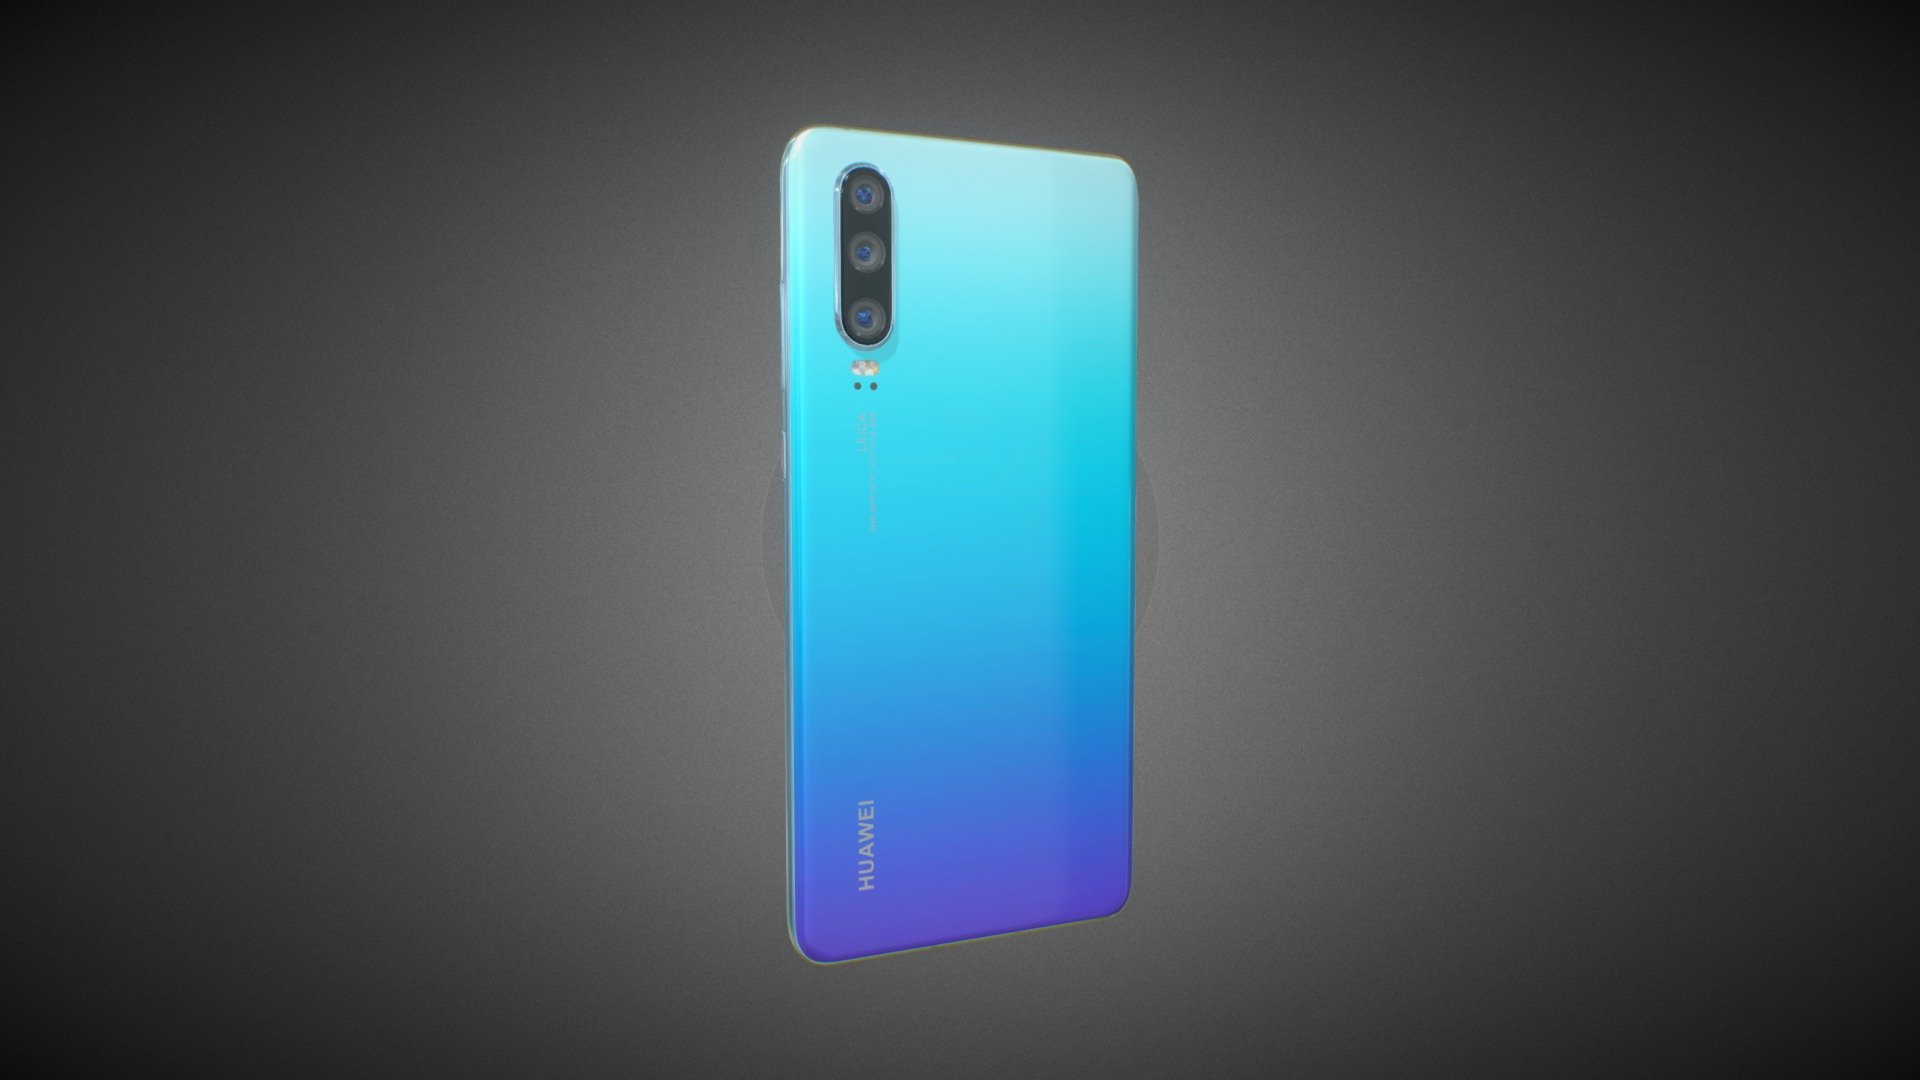 Huawei P30 Breathing Crystal.

This set:
3D element v2.2
The model given is easy to use
- 1 file obj standard
- 1 file 3ds Max 2013 vray material 
- 1 file 3ds Max 2013 corona material
- 1 file of 3Ds
- 1 file e3d full set of materials.
- 1 file cinema 4d standard.

Topology of geometry:
- forms and proportions of The 3D model
- the geometry of the model was created very neatly
- there are no many-sided polygons
- detailed enough for close-up renders
- the model optimized for turbosmooth modifier
- Not collapsed the turbosmooth modified
- apply the Smooth modifier with a parameter to get the desired level of detail

Materials and Textures:
- 3ds max files included Vray-Shaders
- 3ds max files included Corona-Shaders
- file e3d full set of materials
- all texture paths are cleared

Organization of scene:
- to all objects and materials
- real world size (system units - mm)
- coordinates of location of the model in space (x0, y0, z0)
- does not contain extraneous or hidden objects (lights, cameras, shapes etc.) - Huawei P30 Breathing Crystal - Buy Royalty Free 3D model by madMIX 3d model